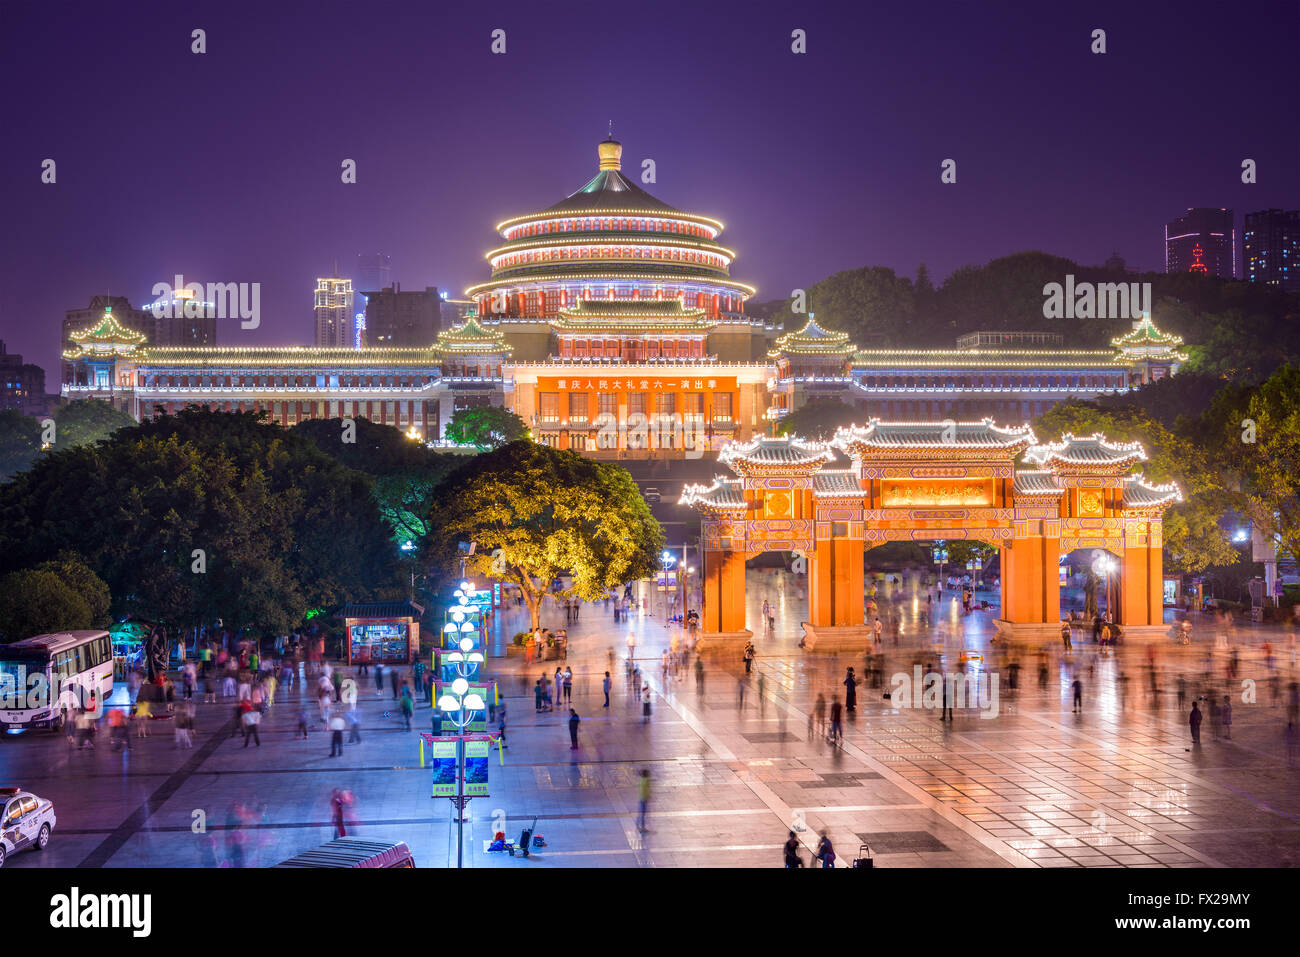 CHONGQING, CHINA - JUNE 1, 2014: Crowds at the Great Hall of the People and People's Square. Stock Photo